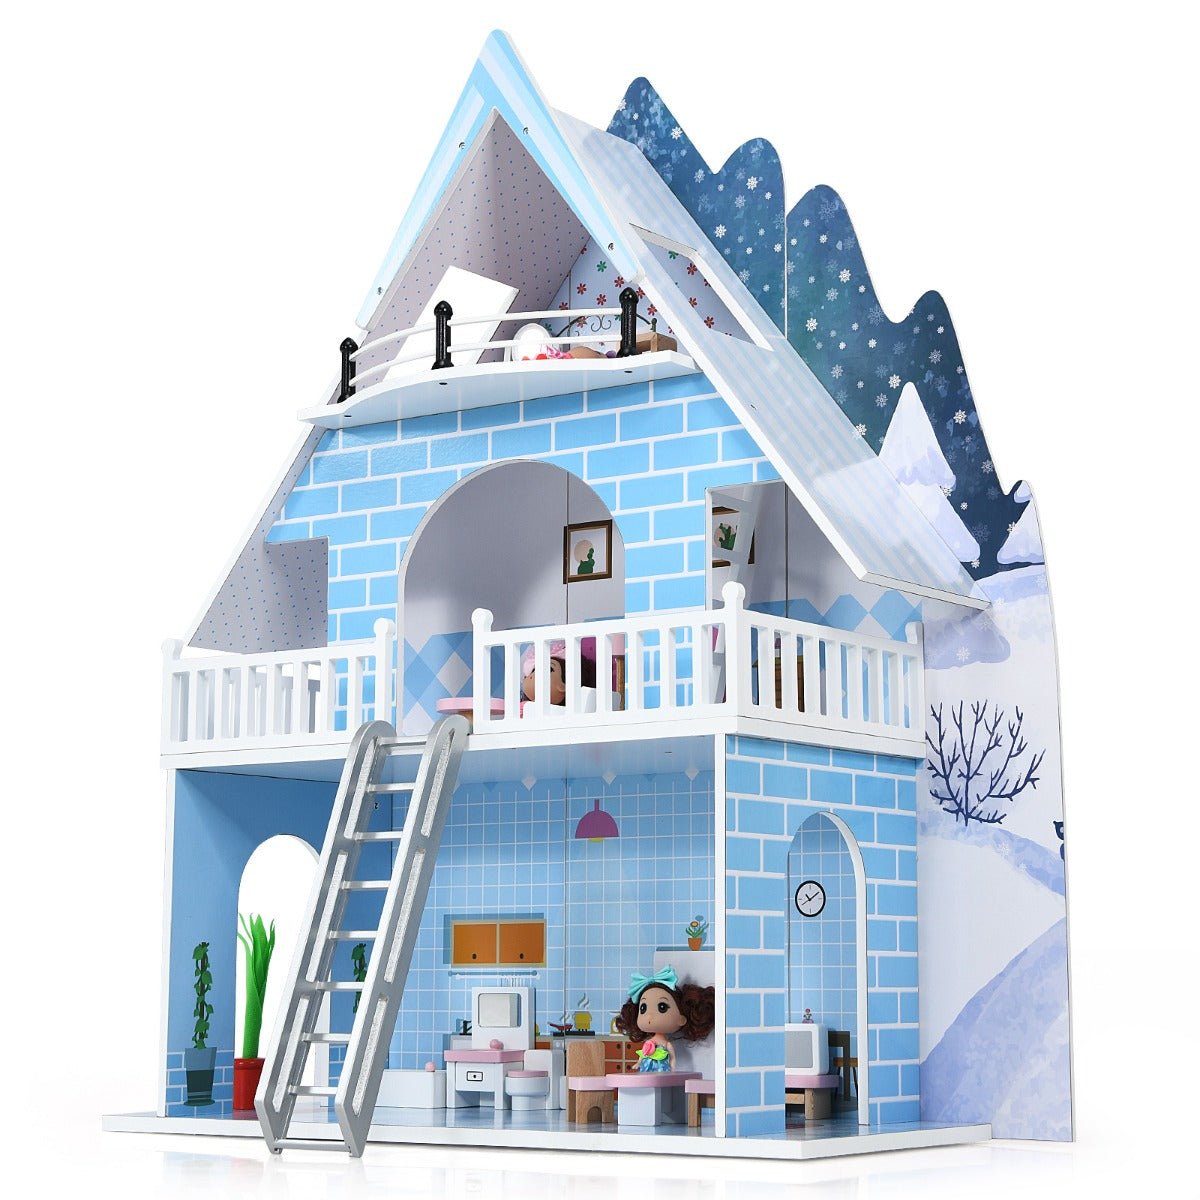 Imaginative Play: Wooden Dollhouse Playset with 15-Piece Furniture for Creative Adventures